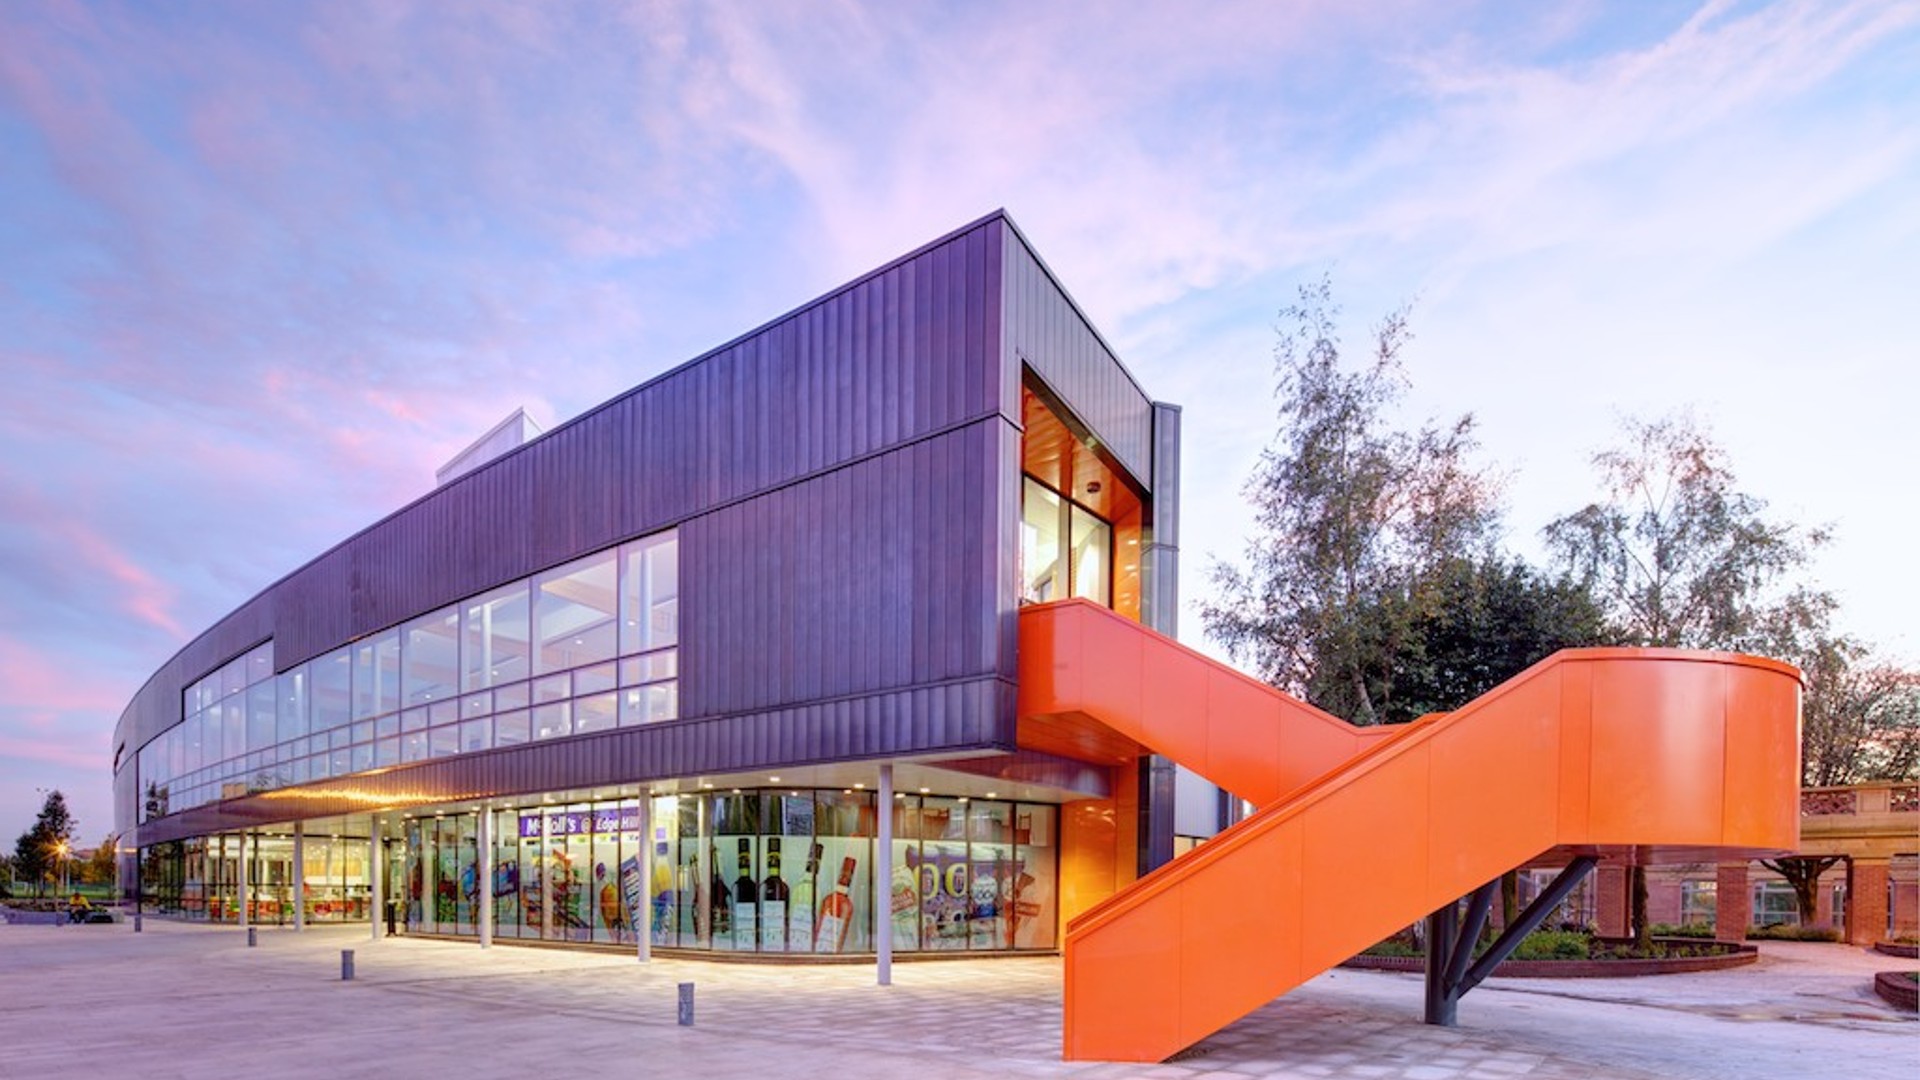 An image of "The Hub" building on the Edge Hill University campus.